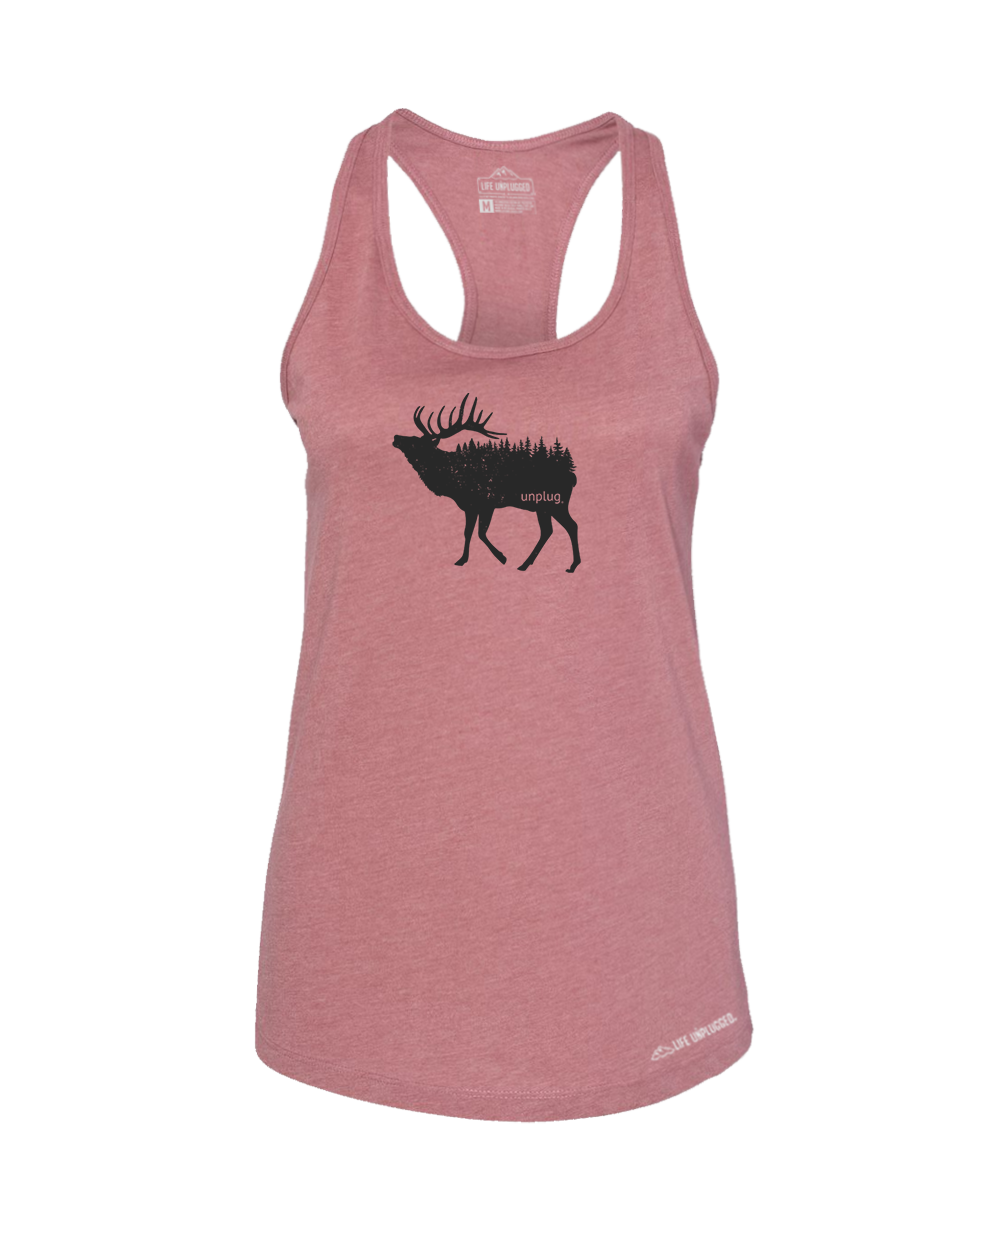 Elk In The Trees Premium Women's Relaxed Fit Racerback Tank Top - Life Unplugged